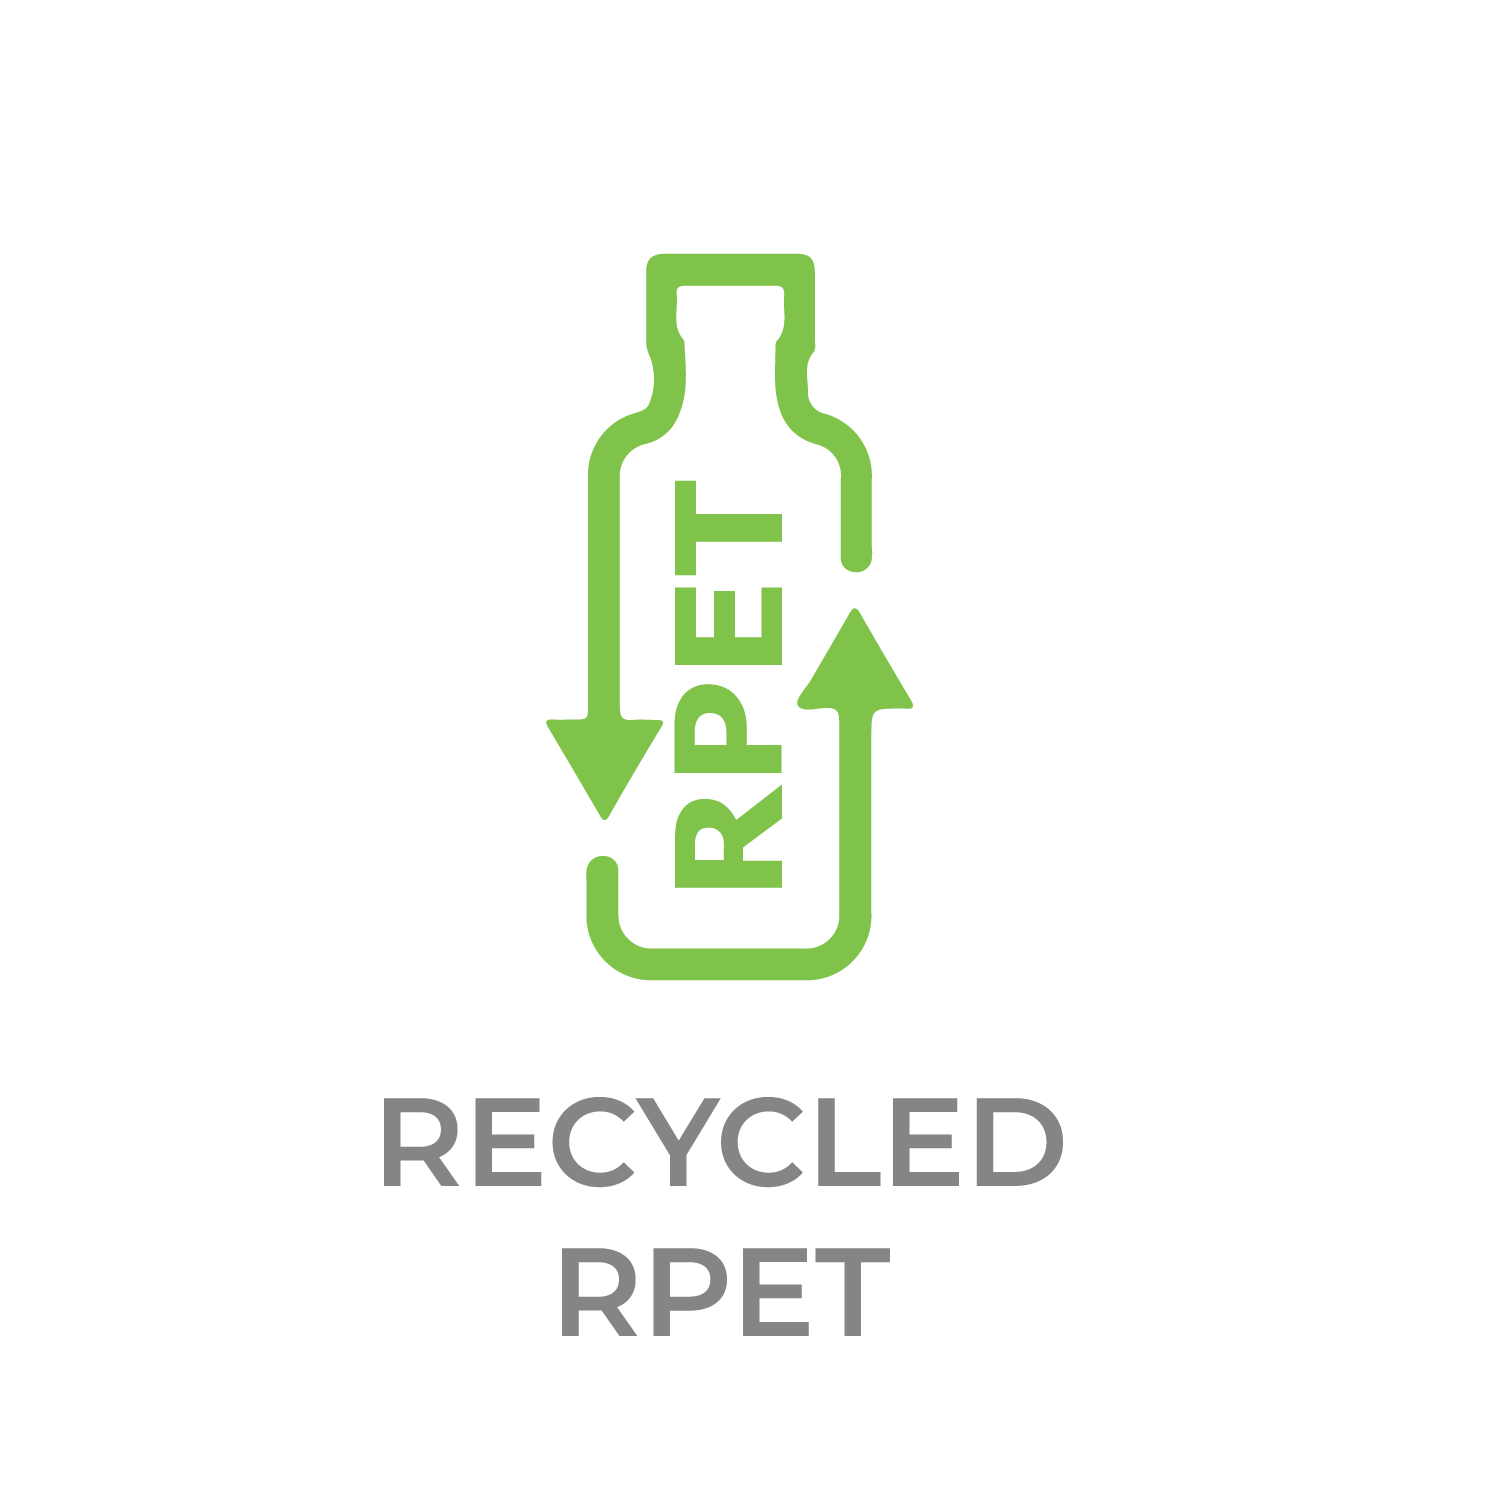 Recycled RPET